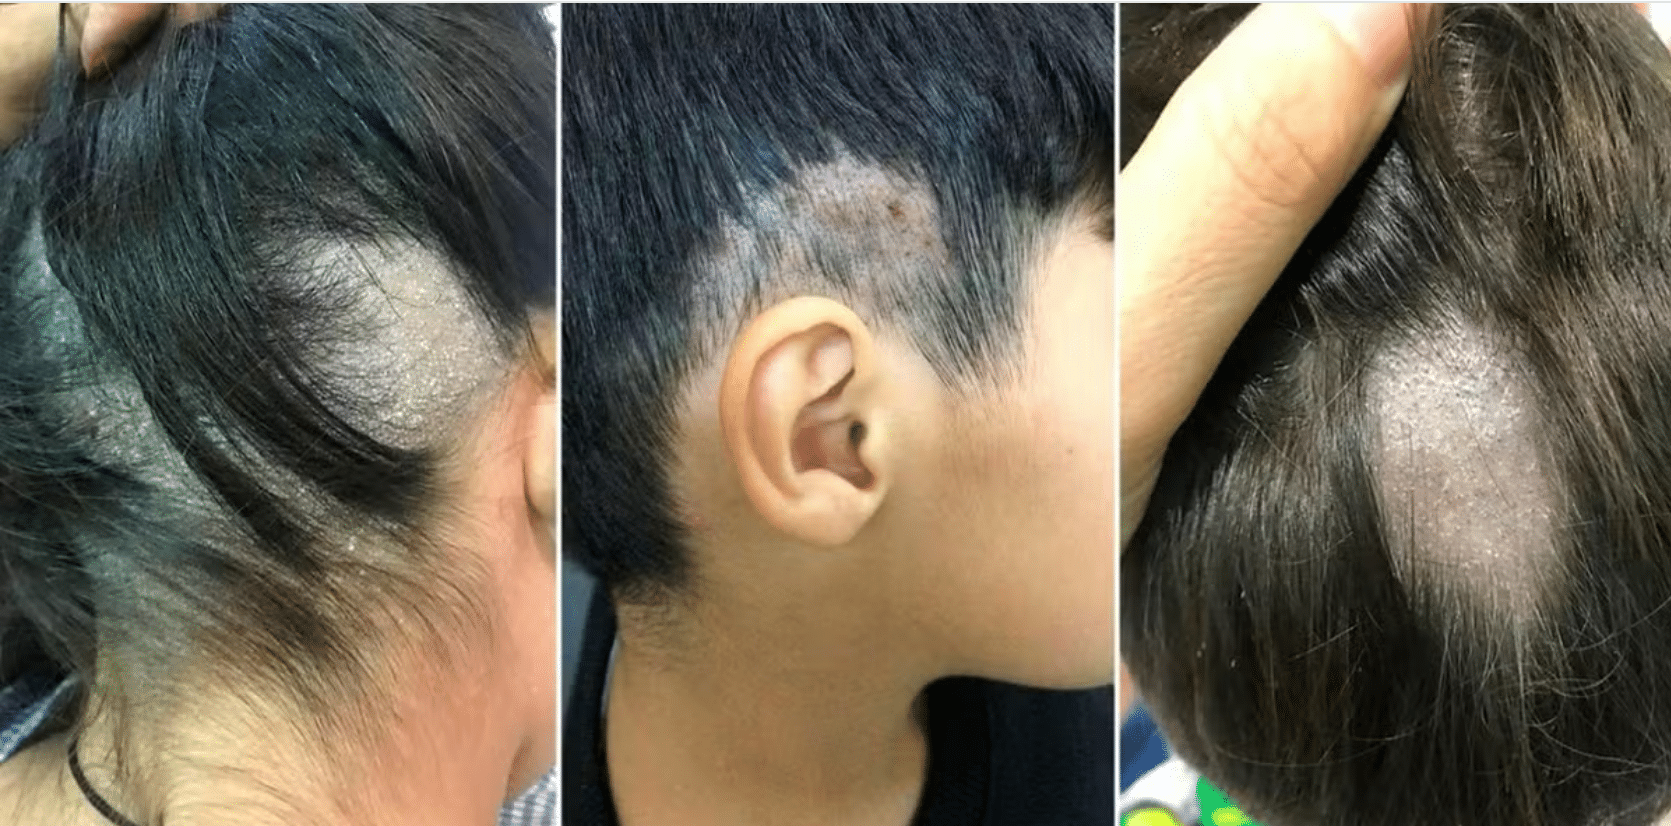 Alert: The number of cases of fungi caused by fungi transmitted in barbershops is increasing